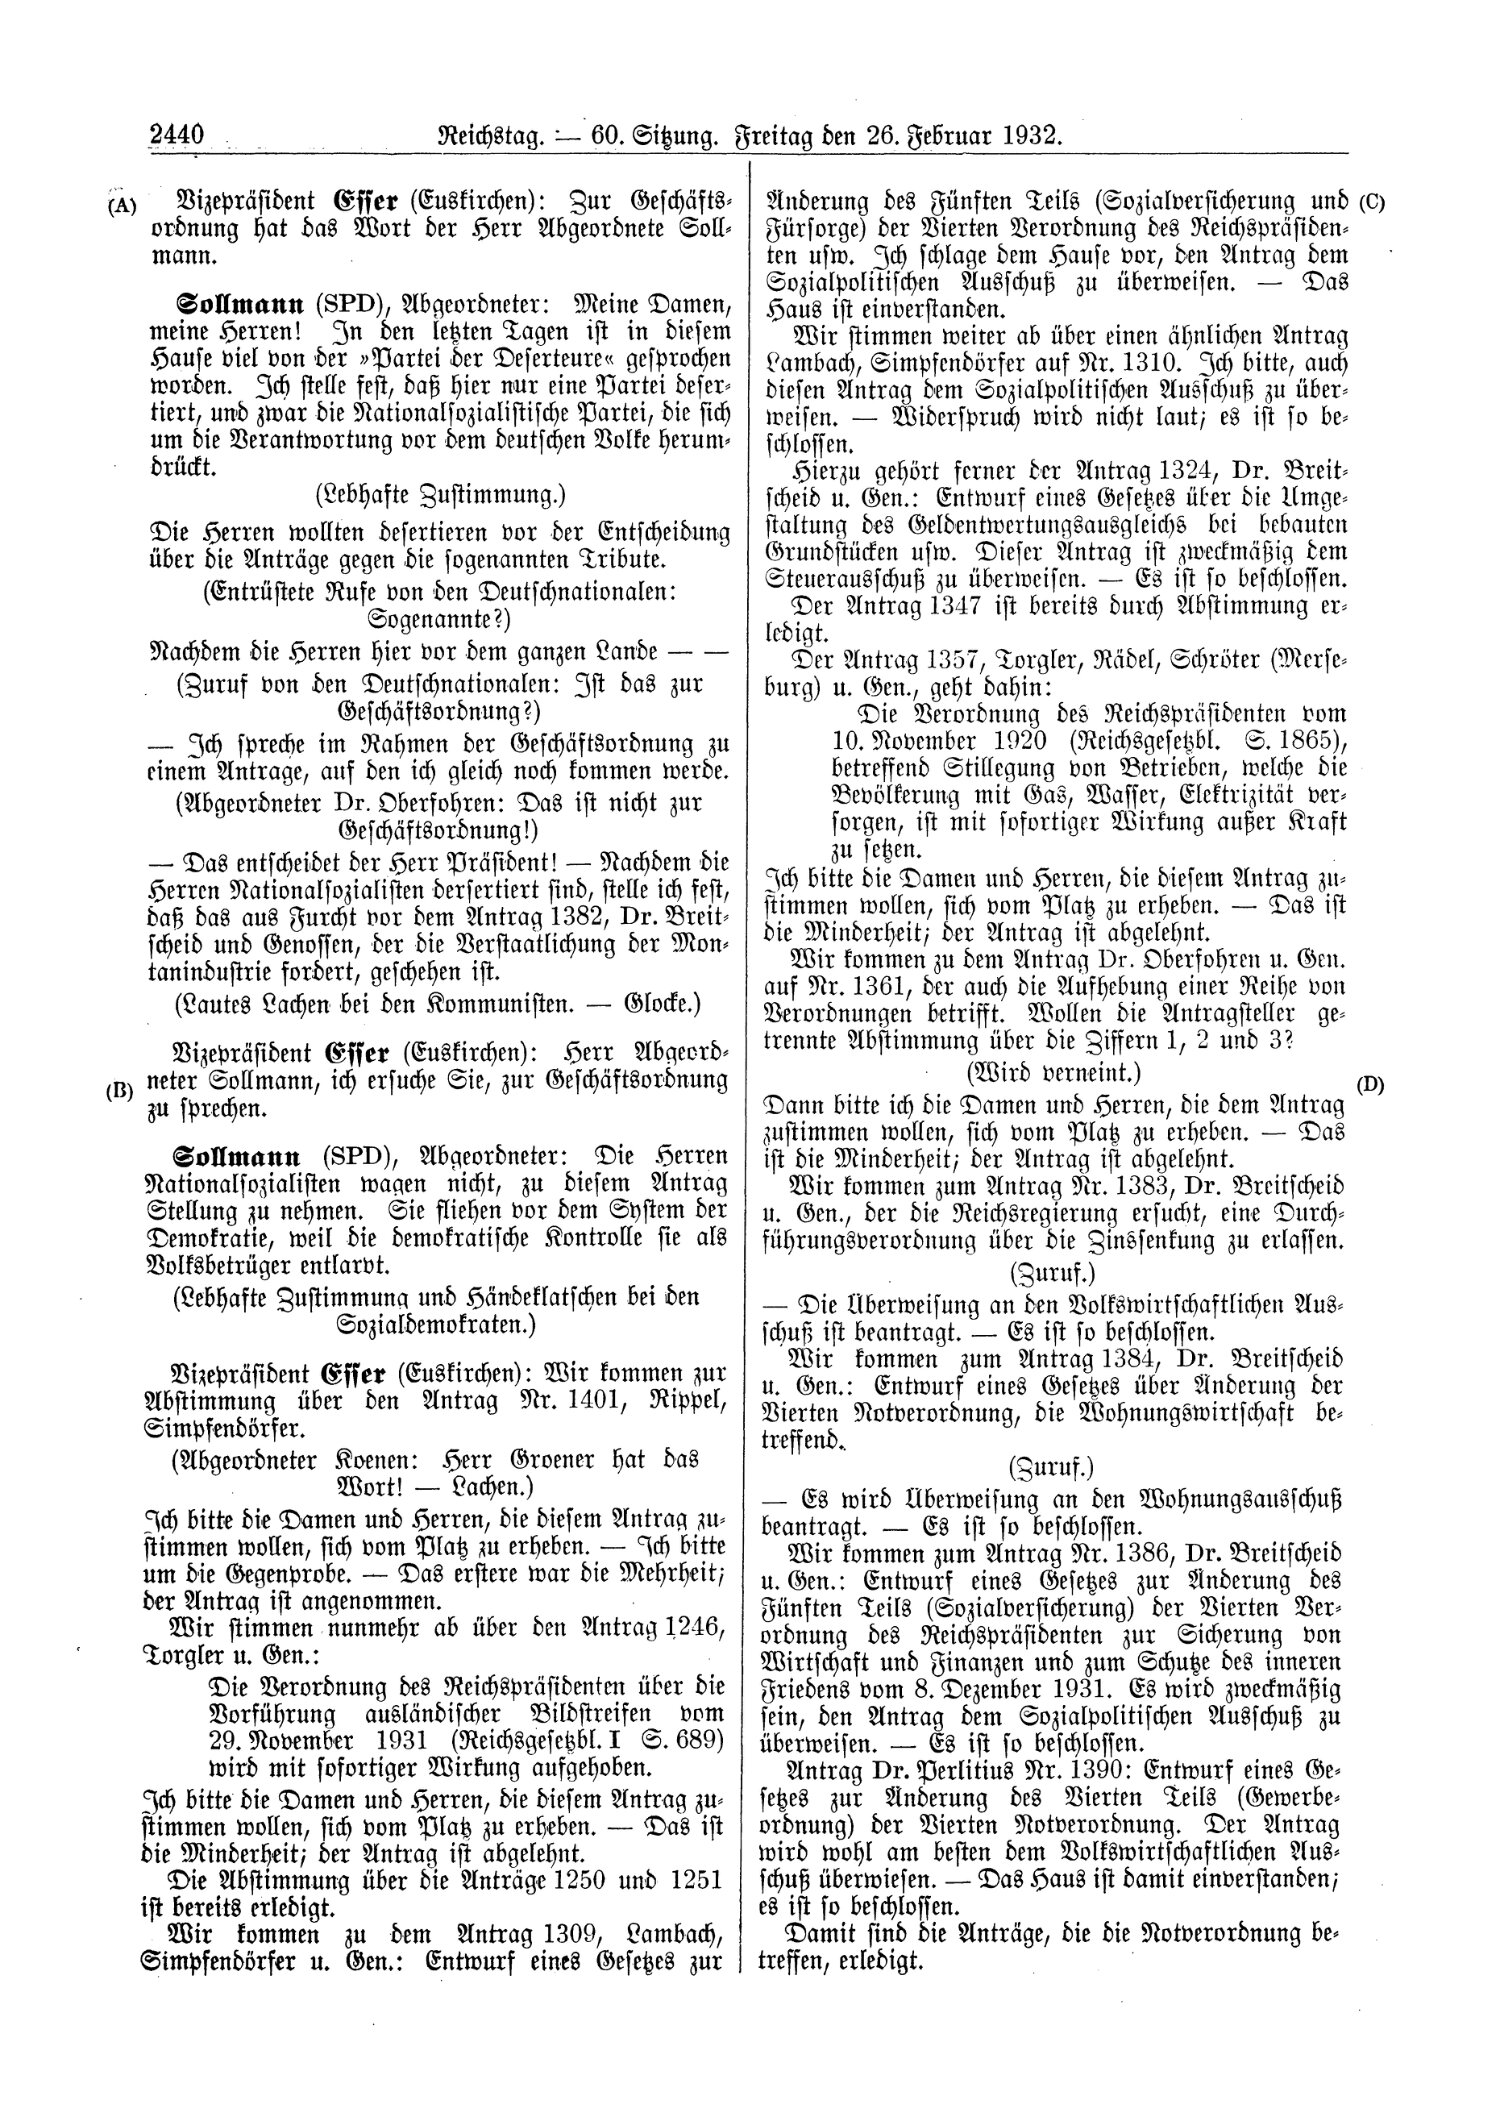 Scan of page 2440